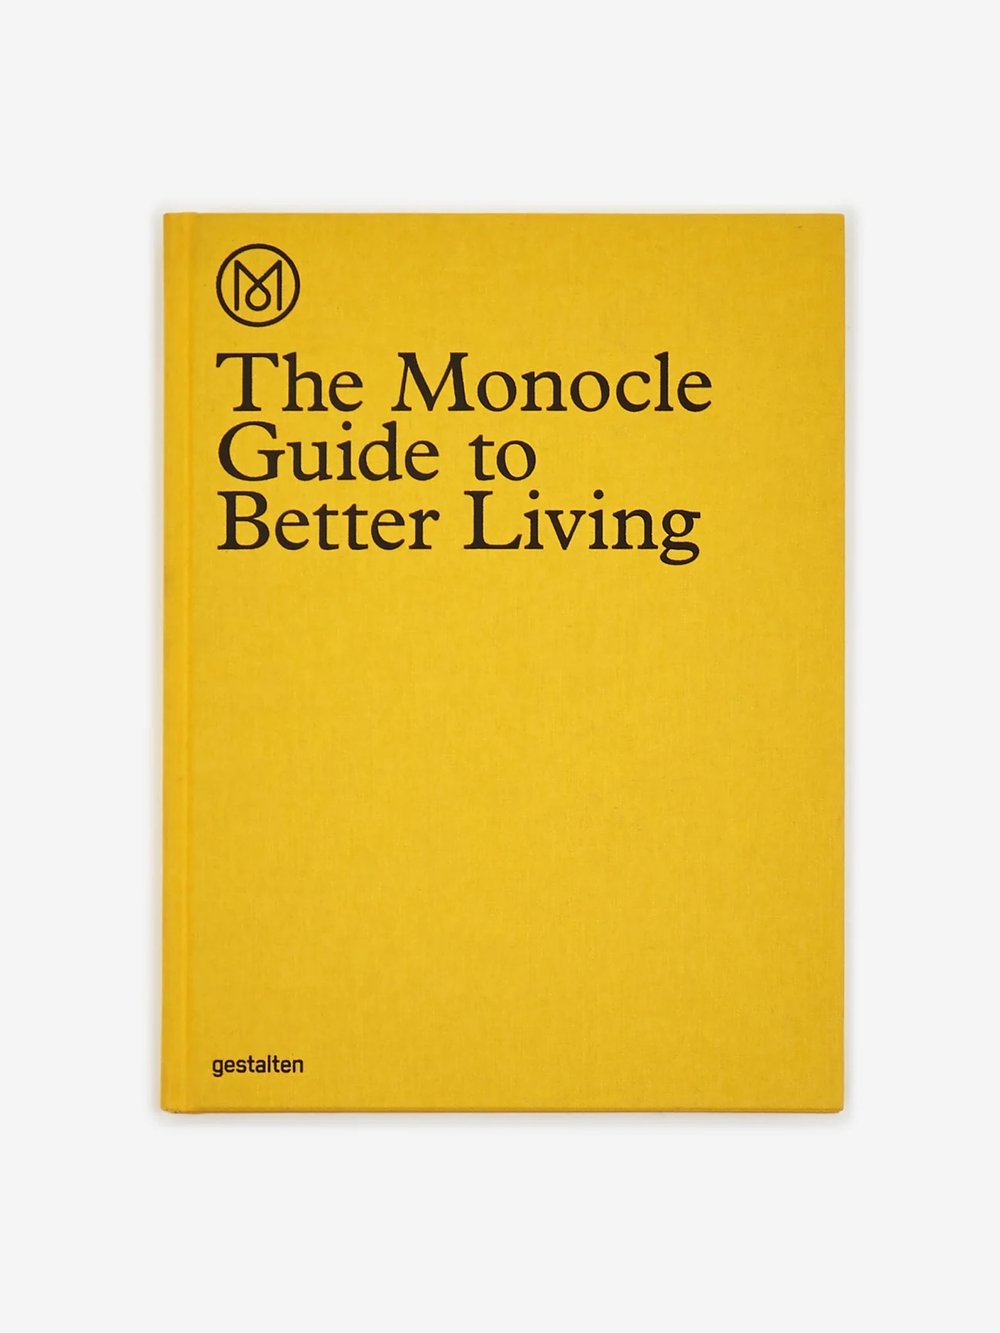 THE-MONOCLE-GUIDE-TO-BETTER-LIVING_SS22_GOODHOOD_123852_6d352ccc-d96a-45ff-8c00-8188922eb7ca_1296x.jpg